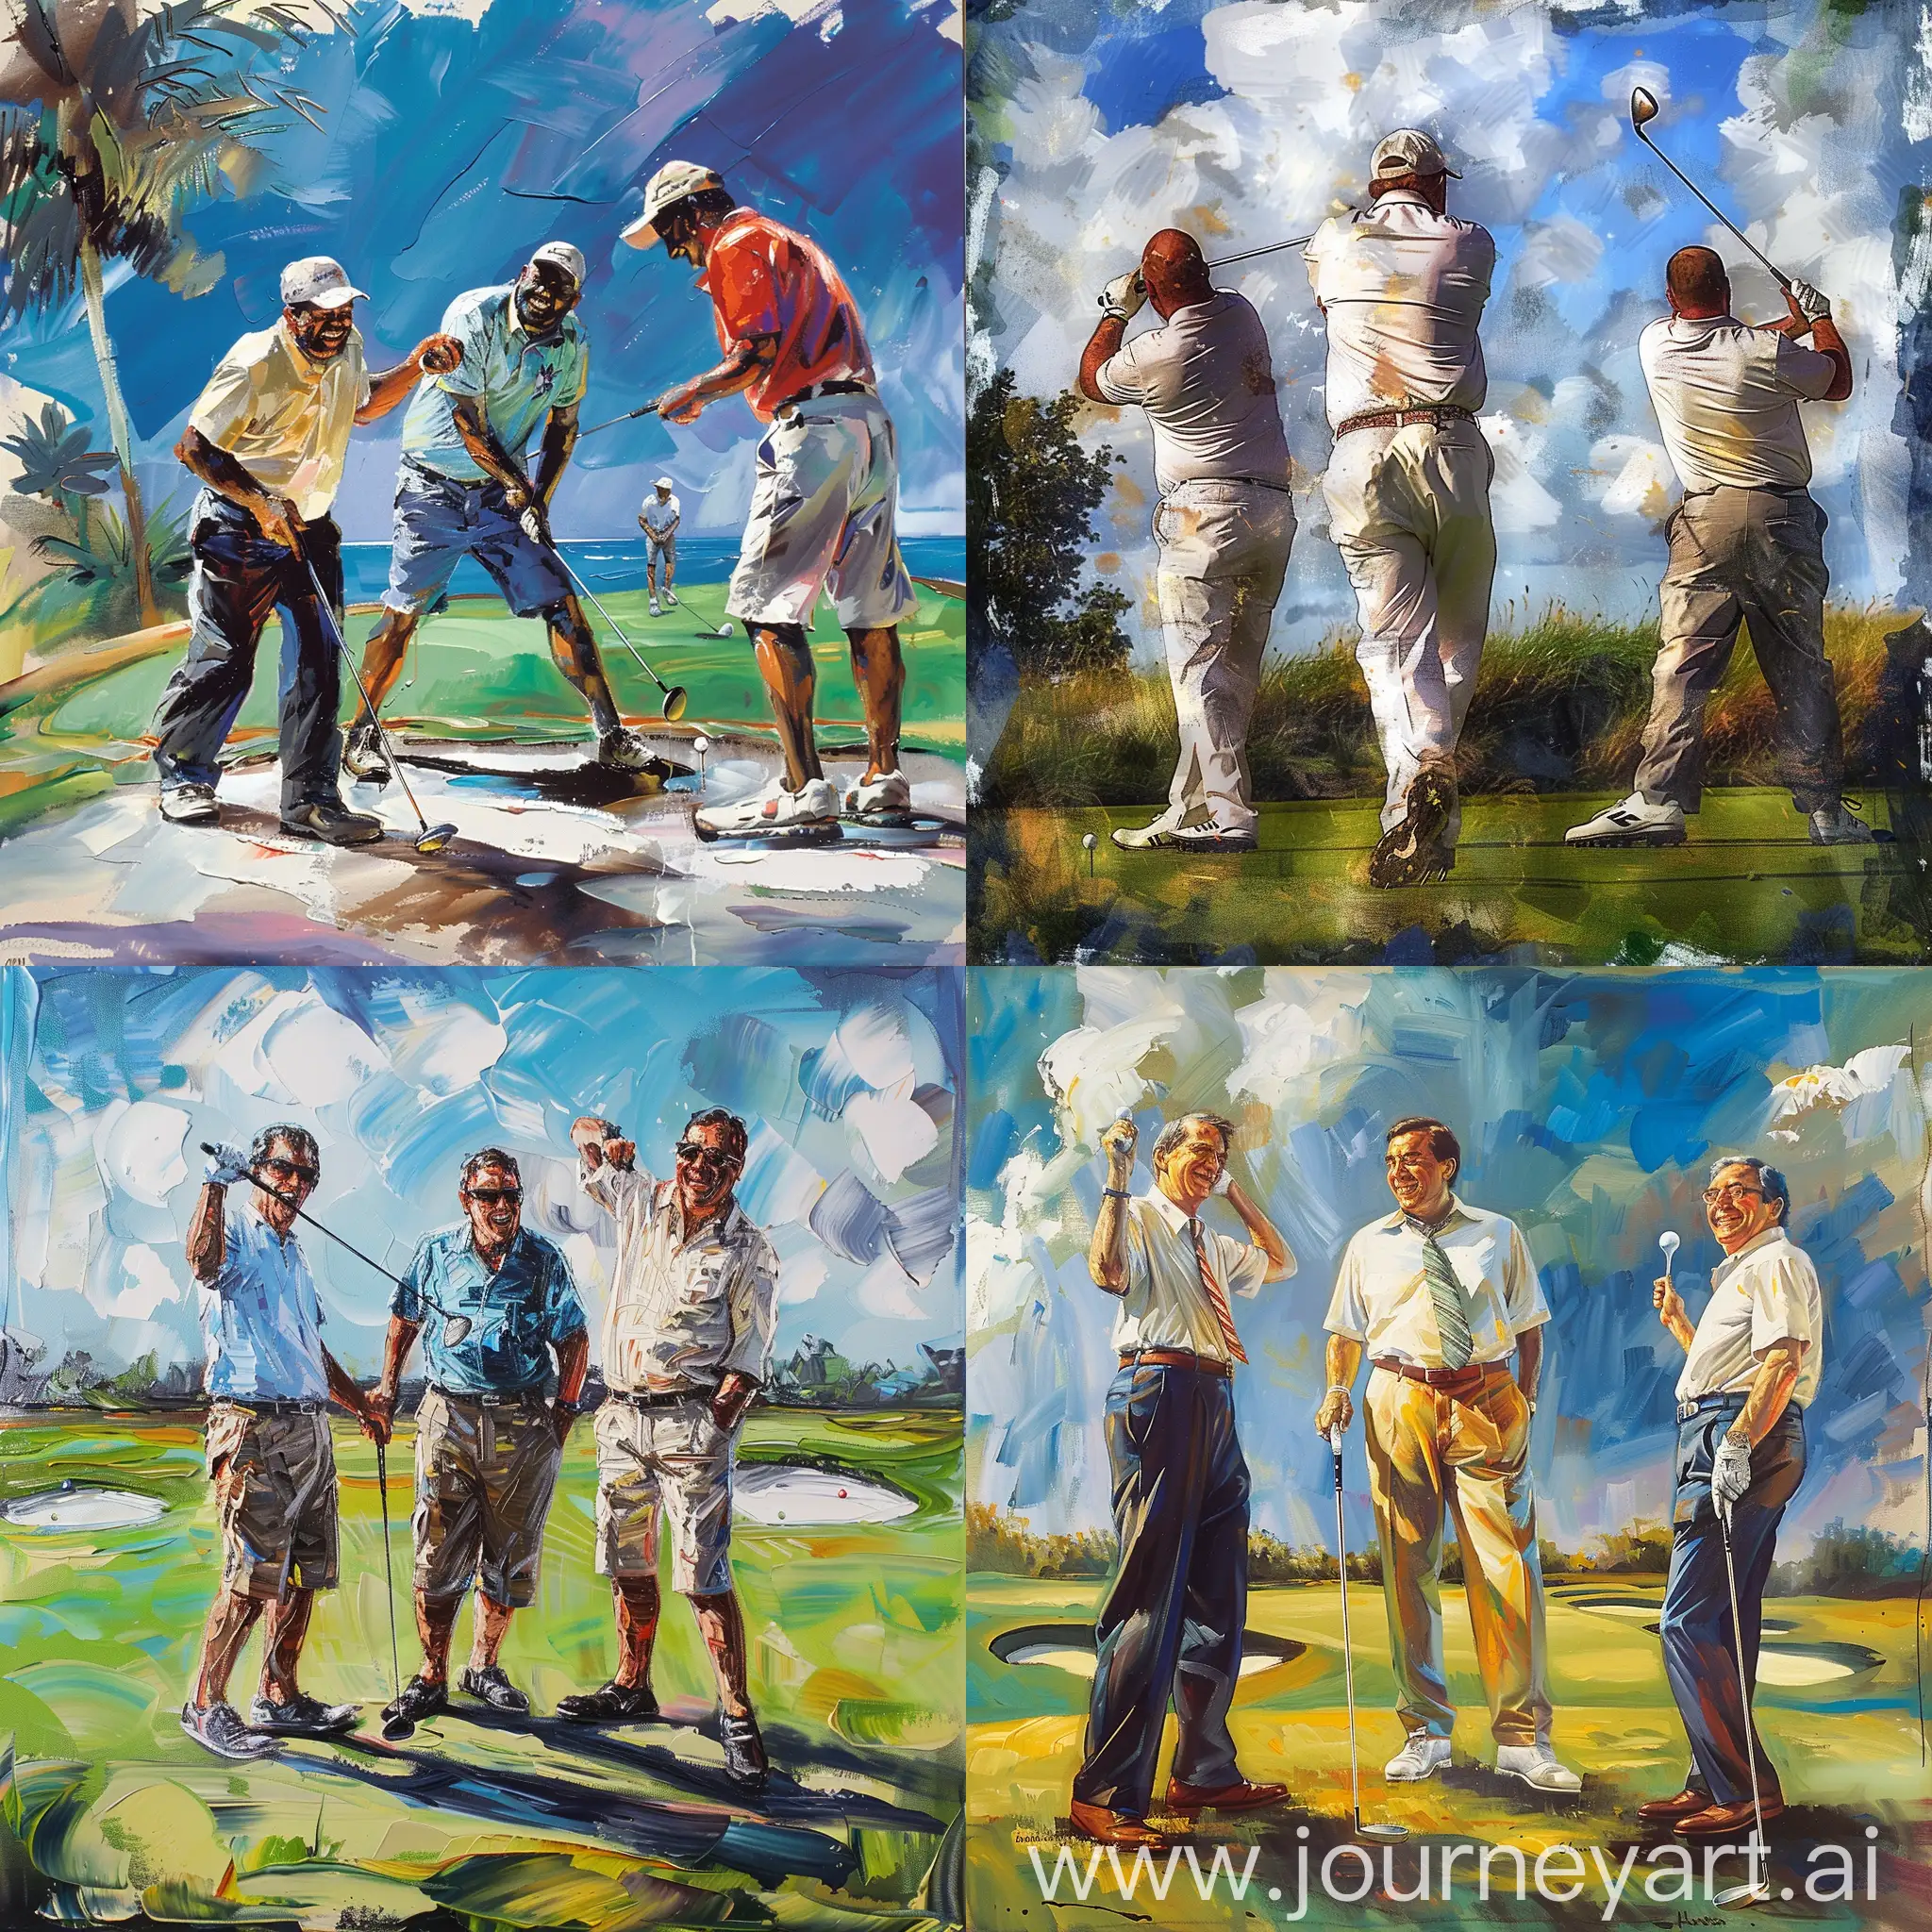 3 VIP bank clients are playing golf and having good time, painting